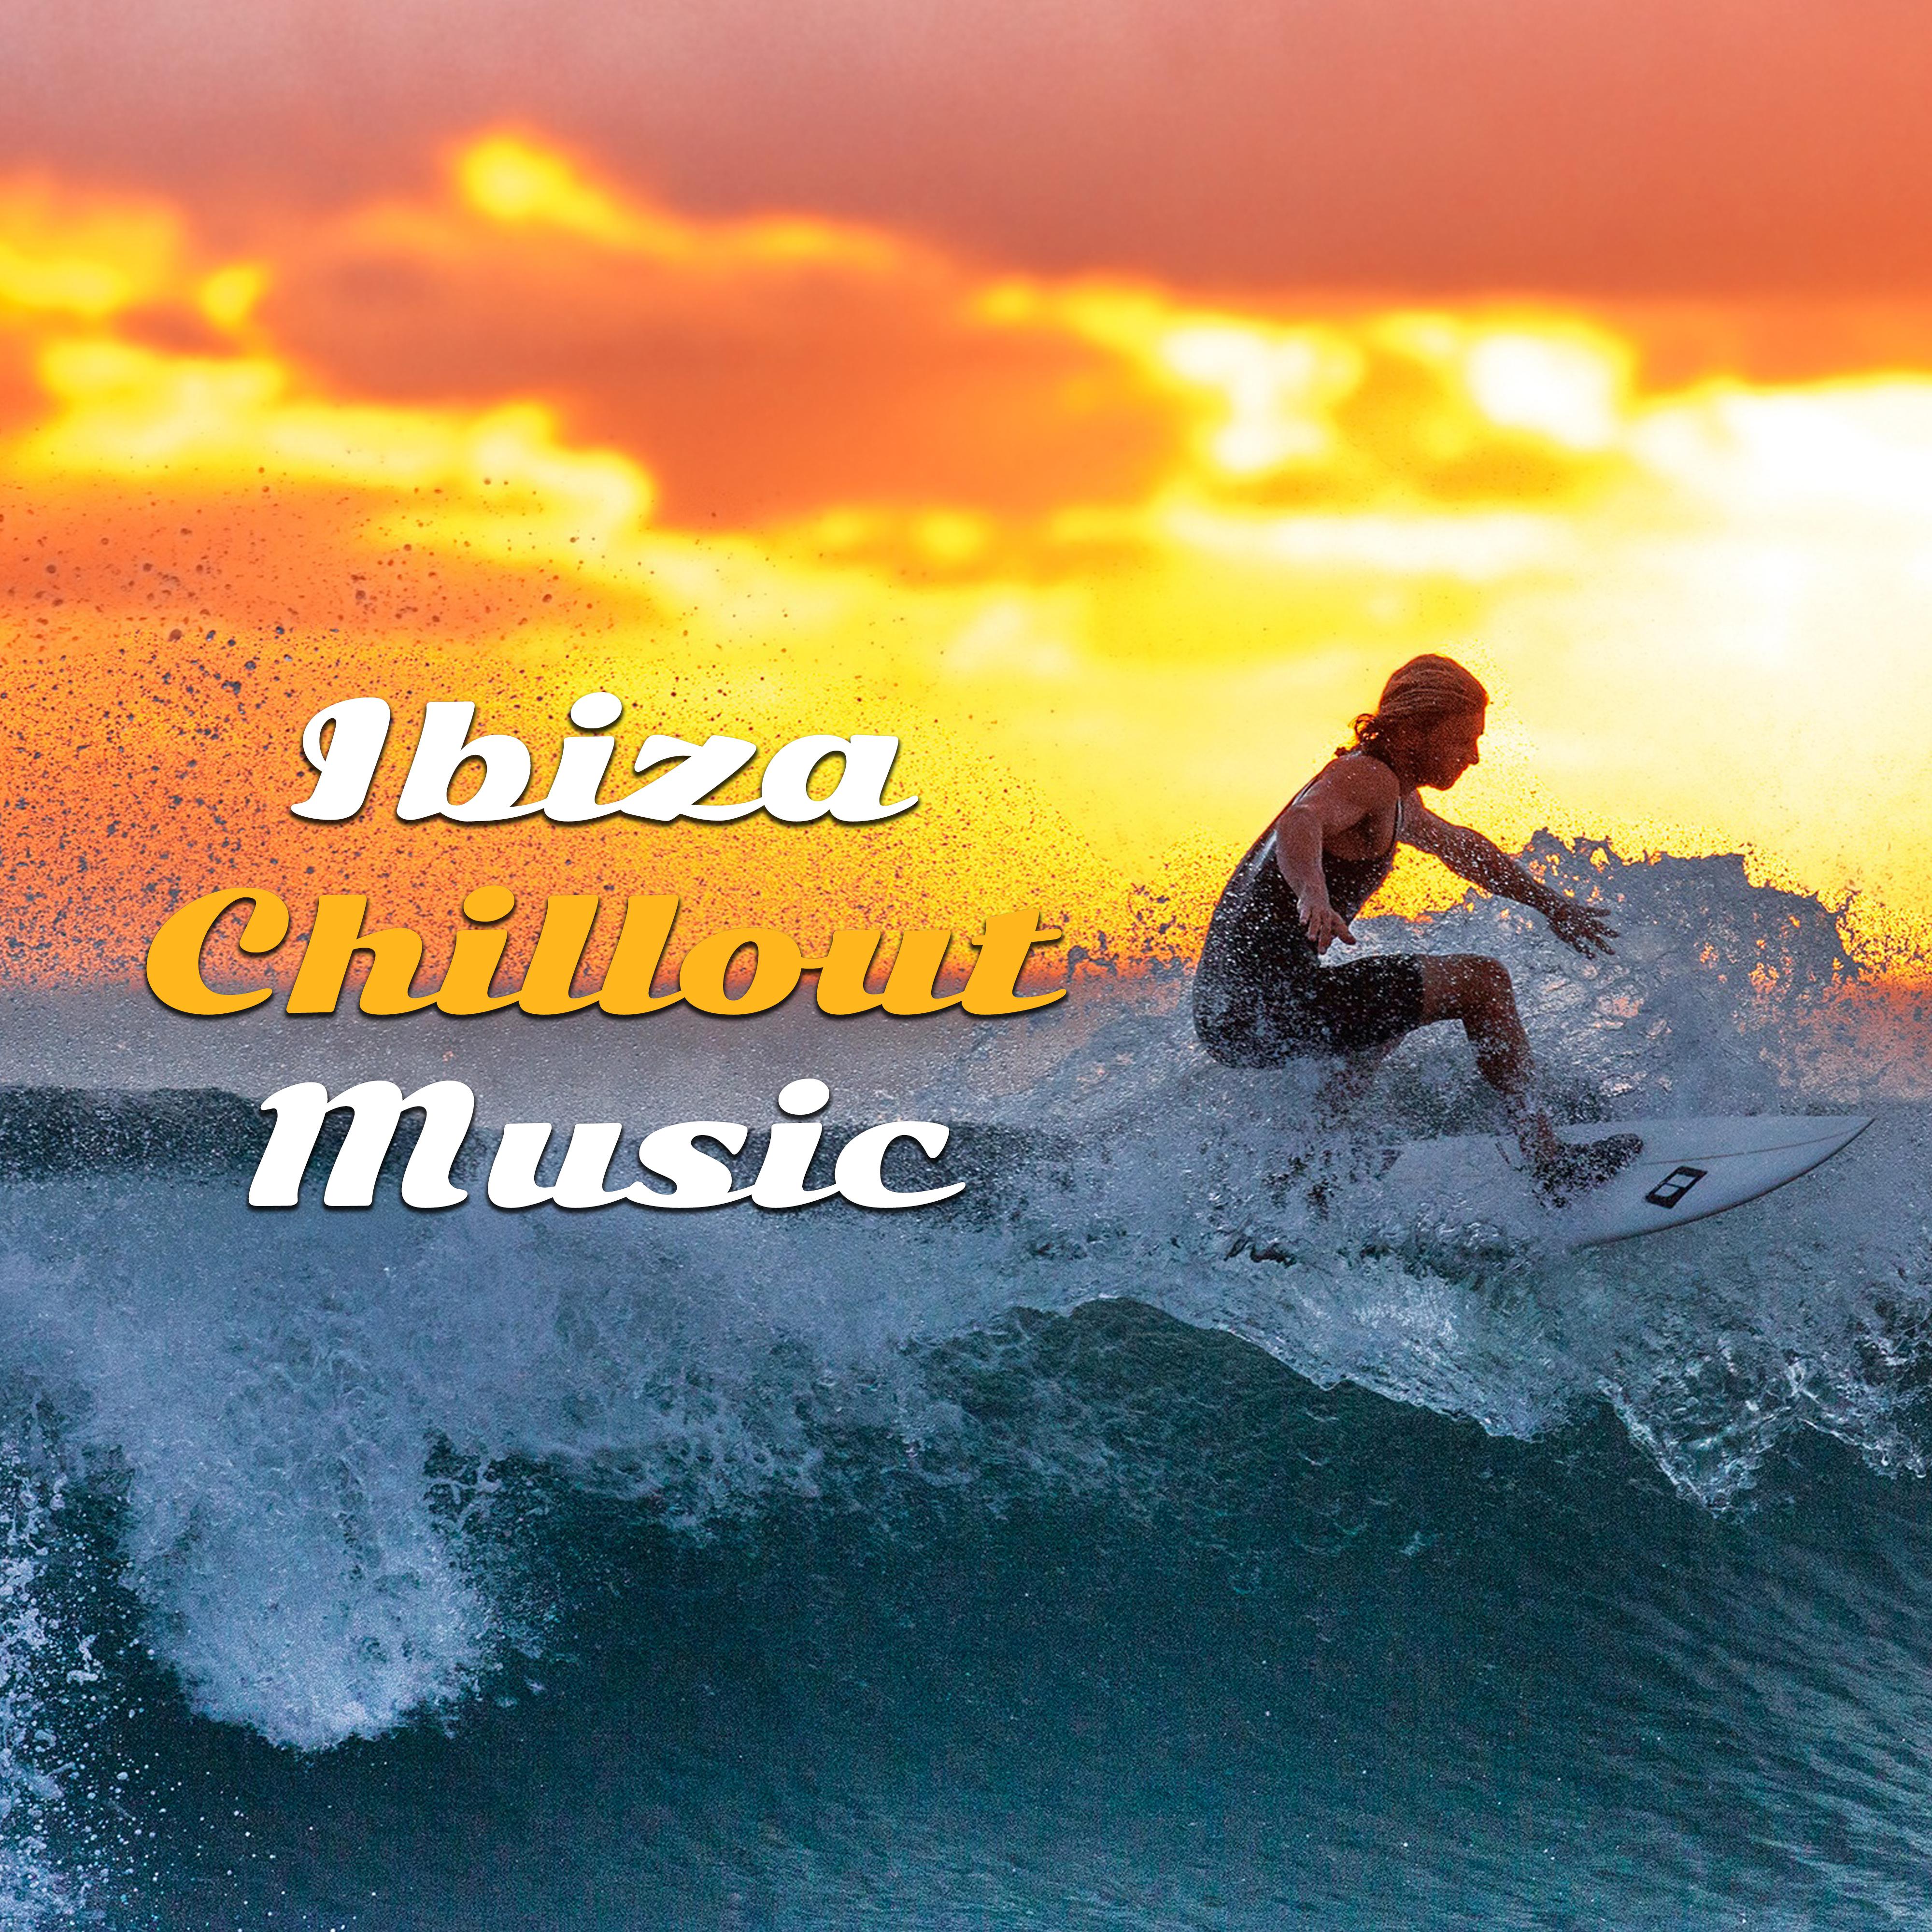 Ibiza Chillout Music – Calming Sounds to Relax, Ibiza Rest, Peaceful Chill Out Music, Easy Listening